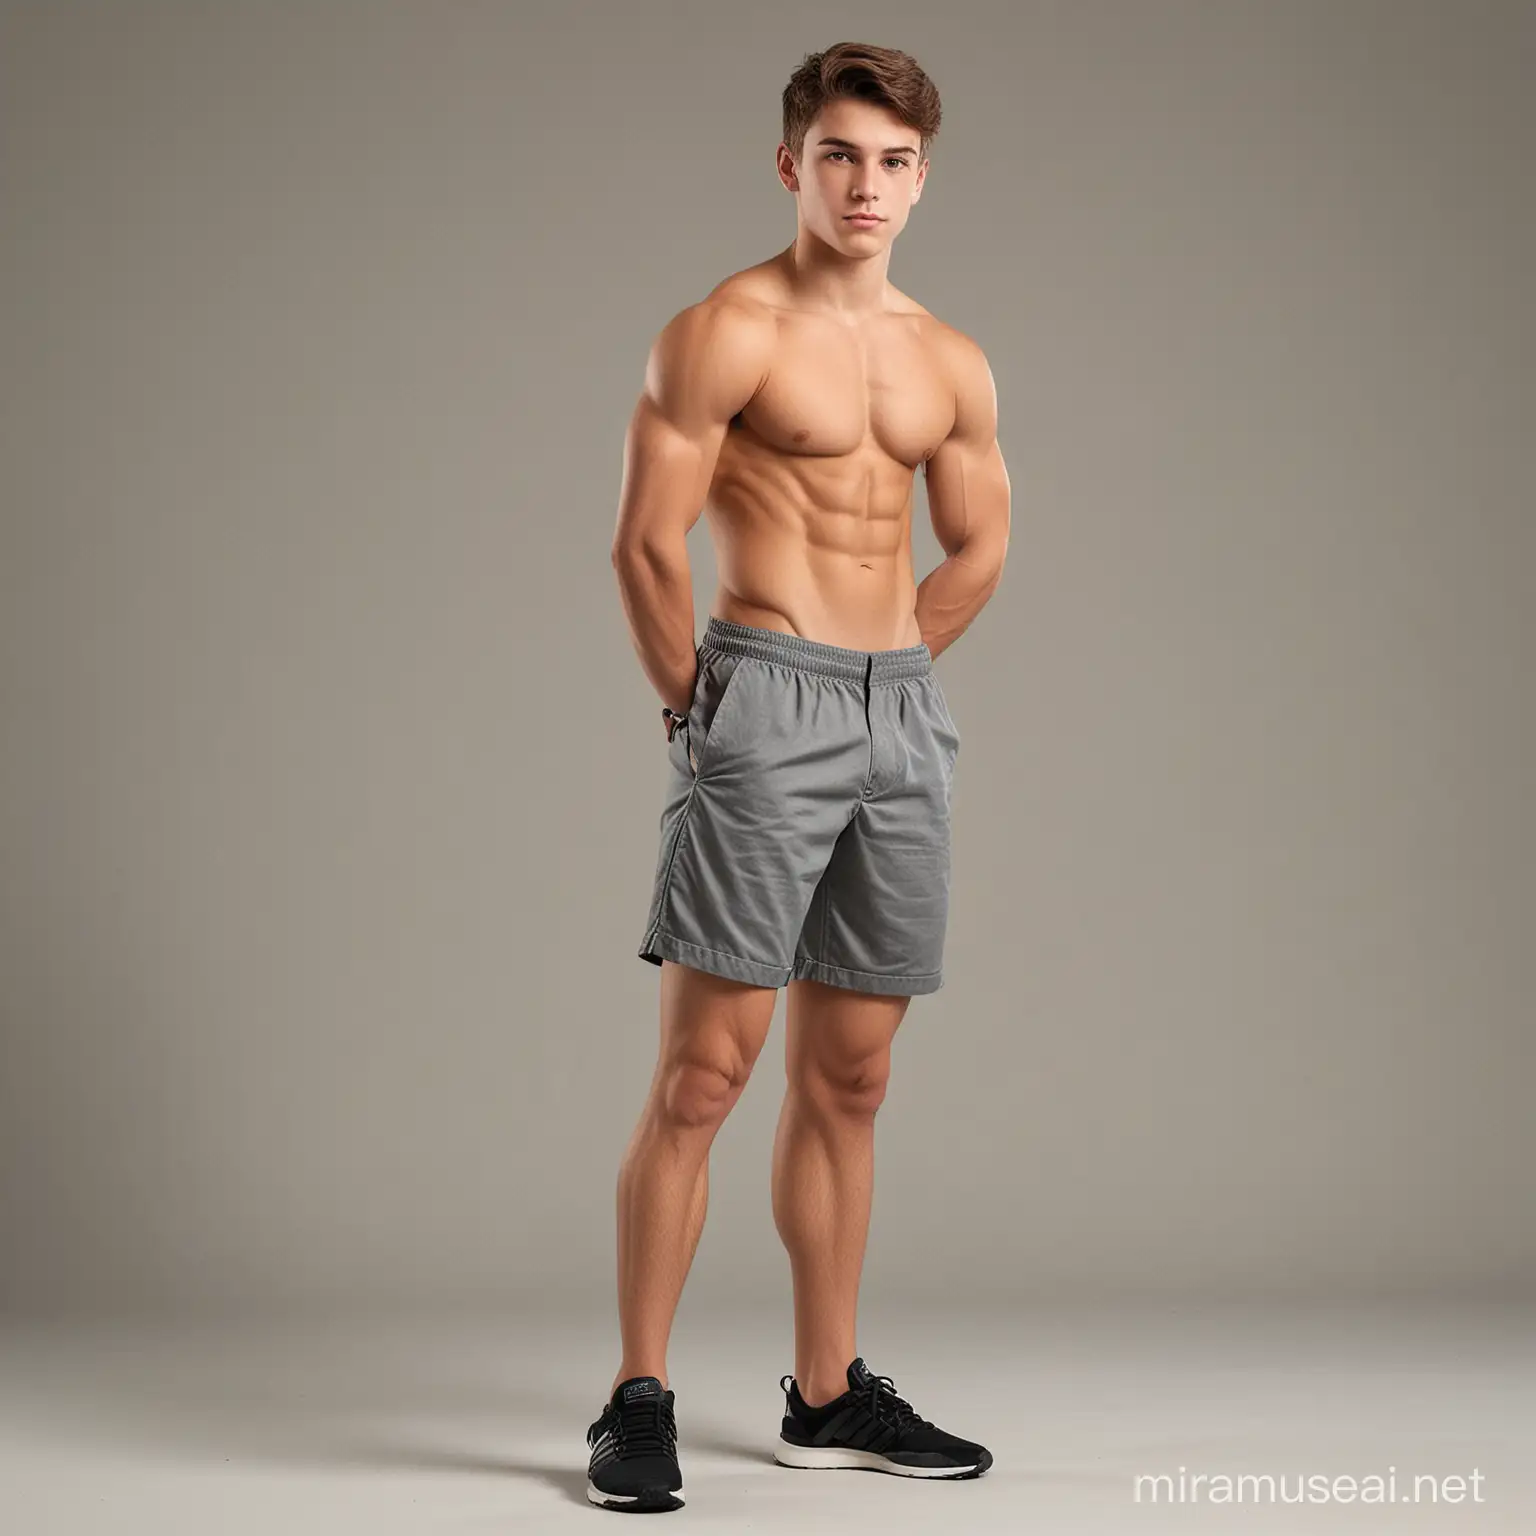 A short, muscular teenage male with very strong legs